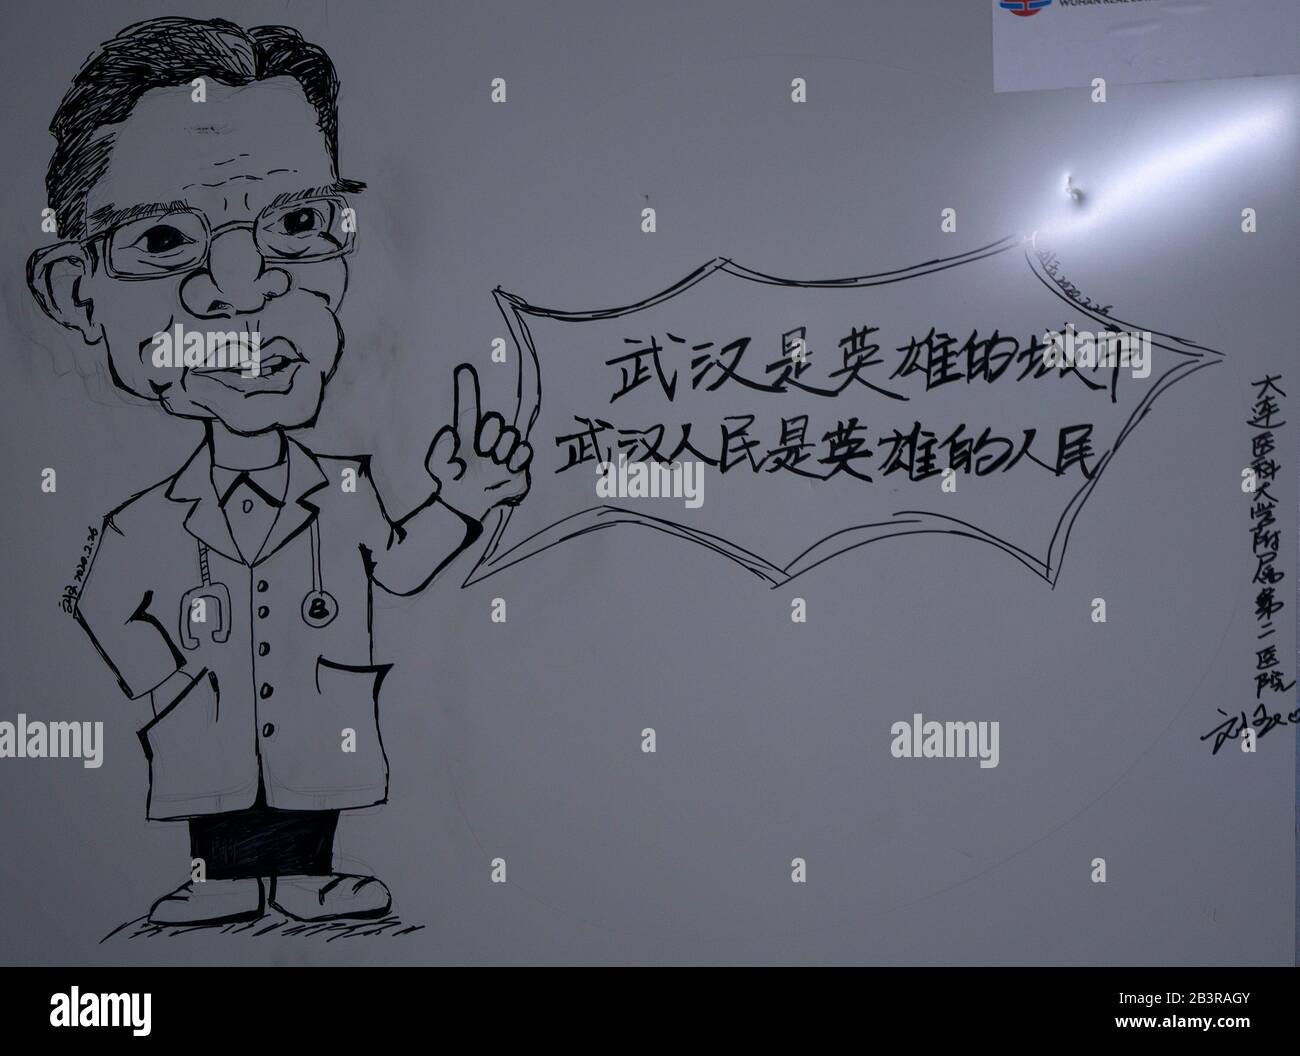 (200305) -- WUHAN, March 5, 2020 (Xinhua) -- Photo taken on March 4, 2020 shows a cartoon on the wall of a corridor at the Leishenshan (Thunder God Mountain) Hospital in Wuhan, central China's Hubei Province.  The portrait of Zhong Nanshan, a renowned Chinese respiratory specialist, is depicted with the words reading Wuhan is a heroic city, and people in Wuhan of Hubei are heroic people.  Dalian's oysters and Wuhan's hot-dry noodles, as well as the Dalian Railway Station and Wuhan Yellow Crane Tower, lovely cartoon pictures drawn on the ward wall of the makeshift hospital in Wuhan have gone vi Stock Photo